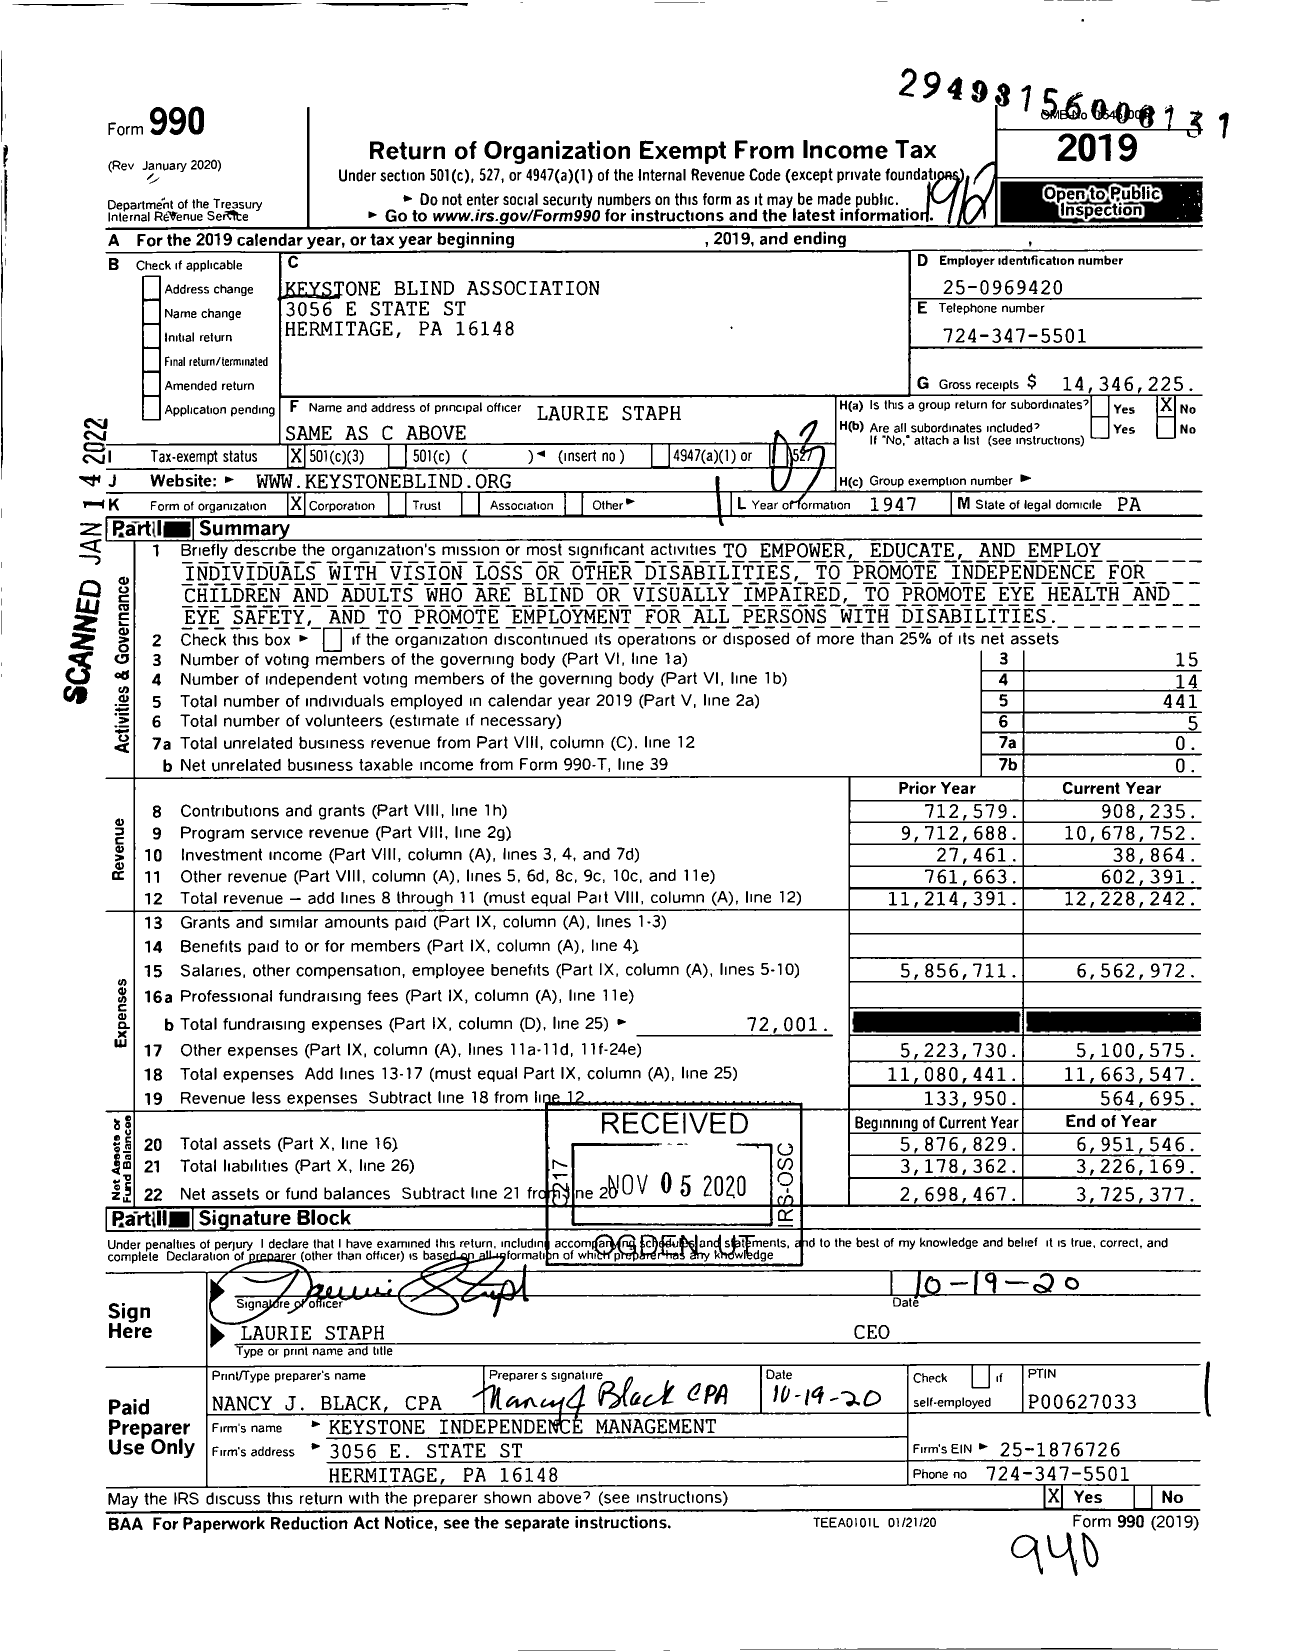 Image of first page of 2019 Form 990 for Keystone Blind Association